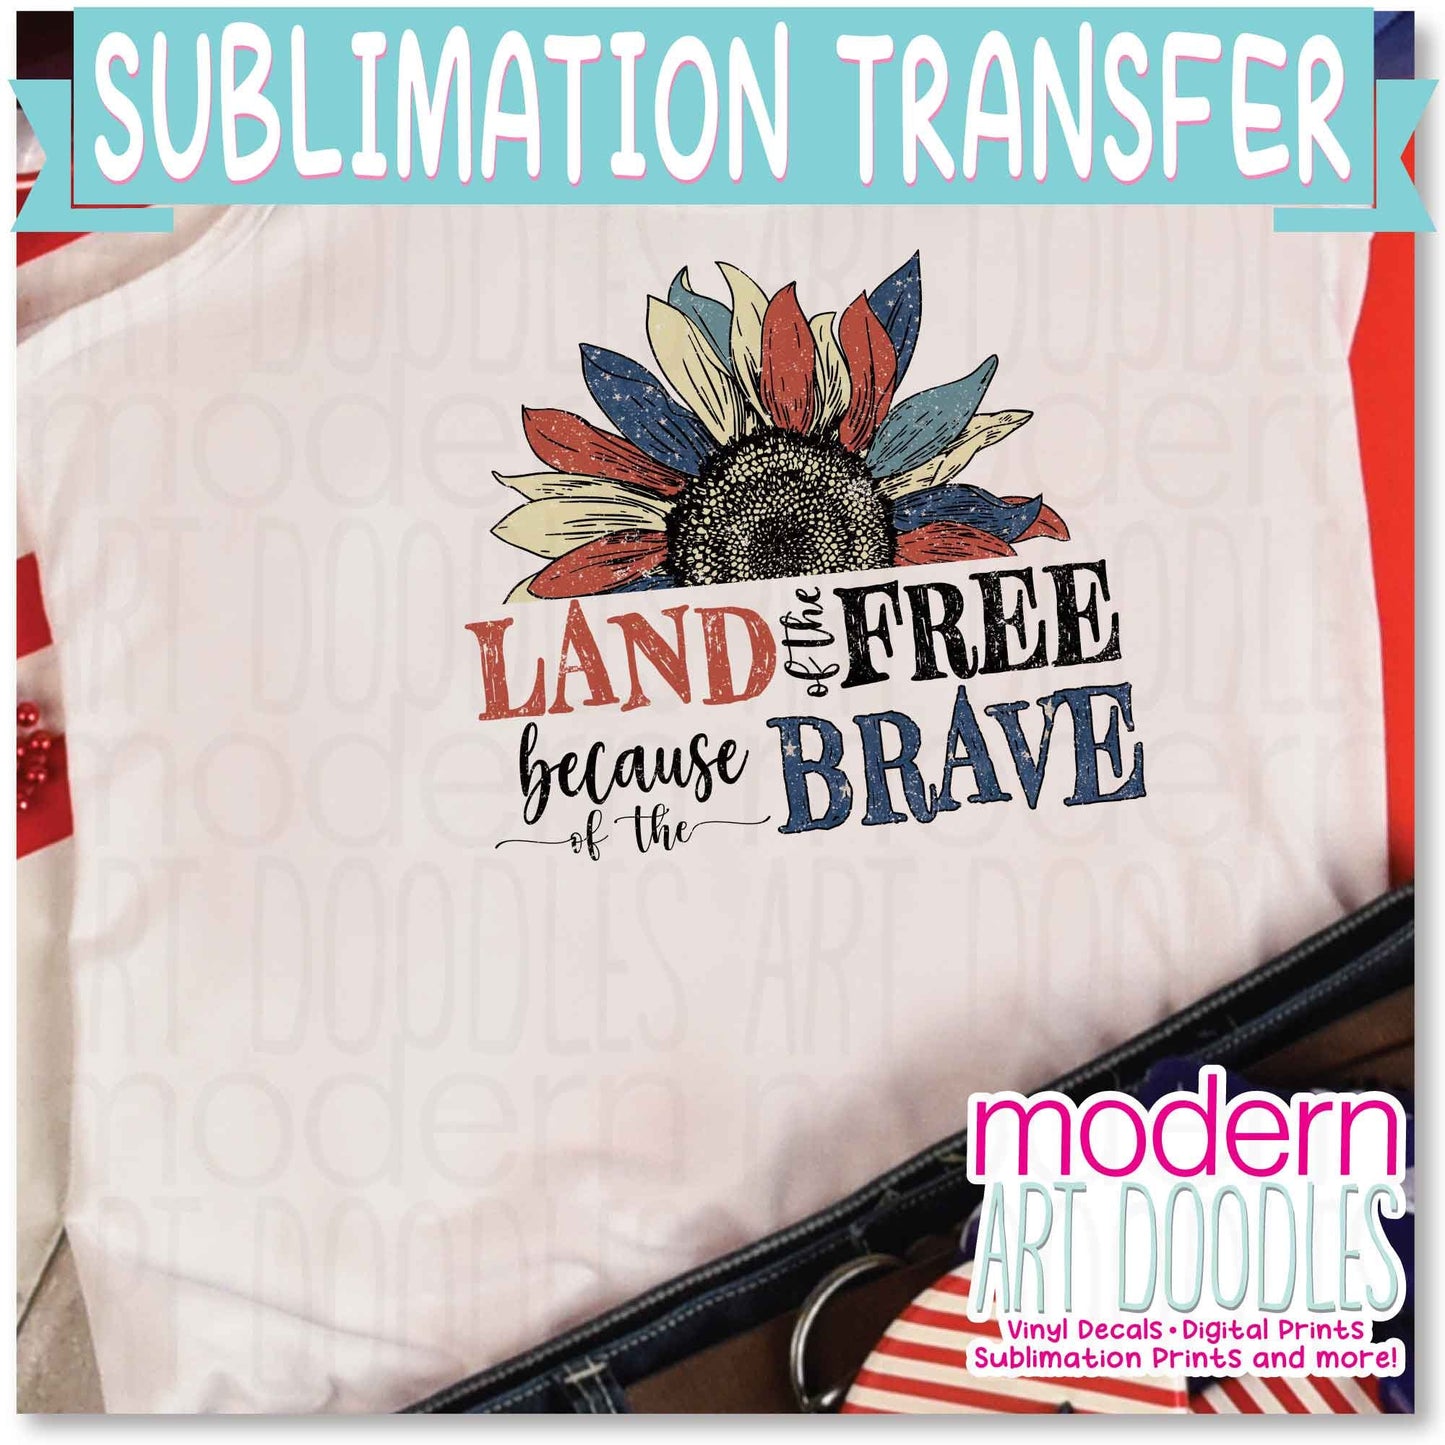 Land Of the Free Home Of The Brave 4th of July Patriotic Freedom 2 Sublimation Print - Ready to Press - Ready to Ship